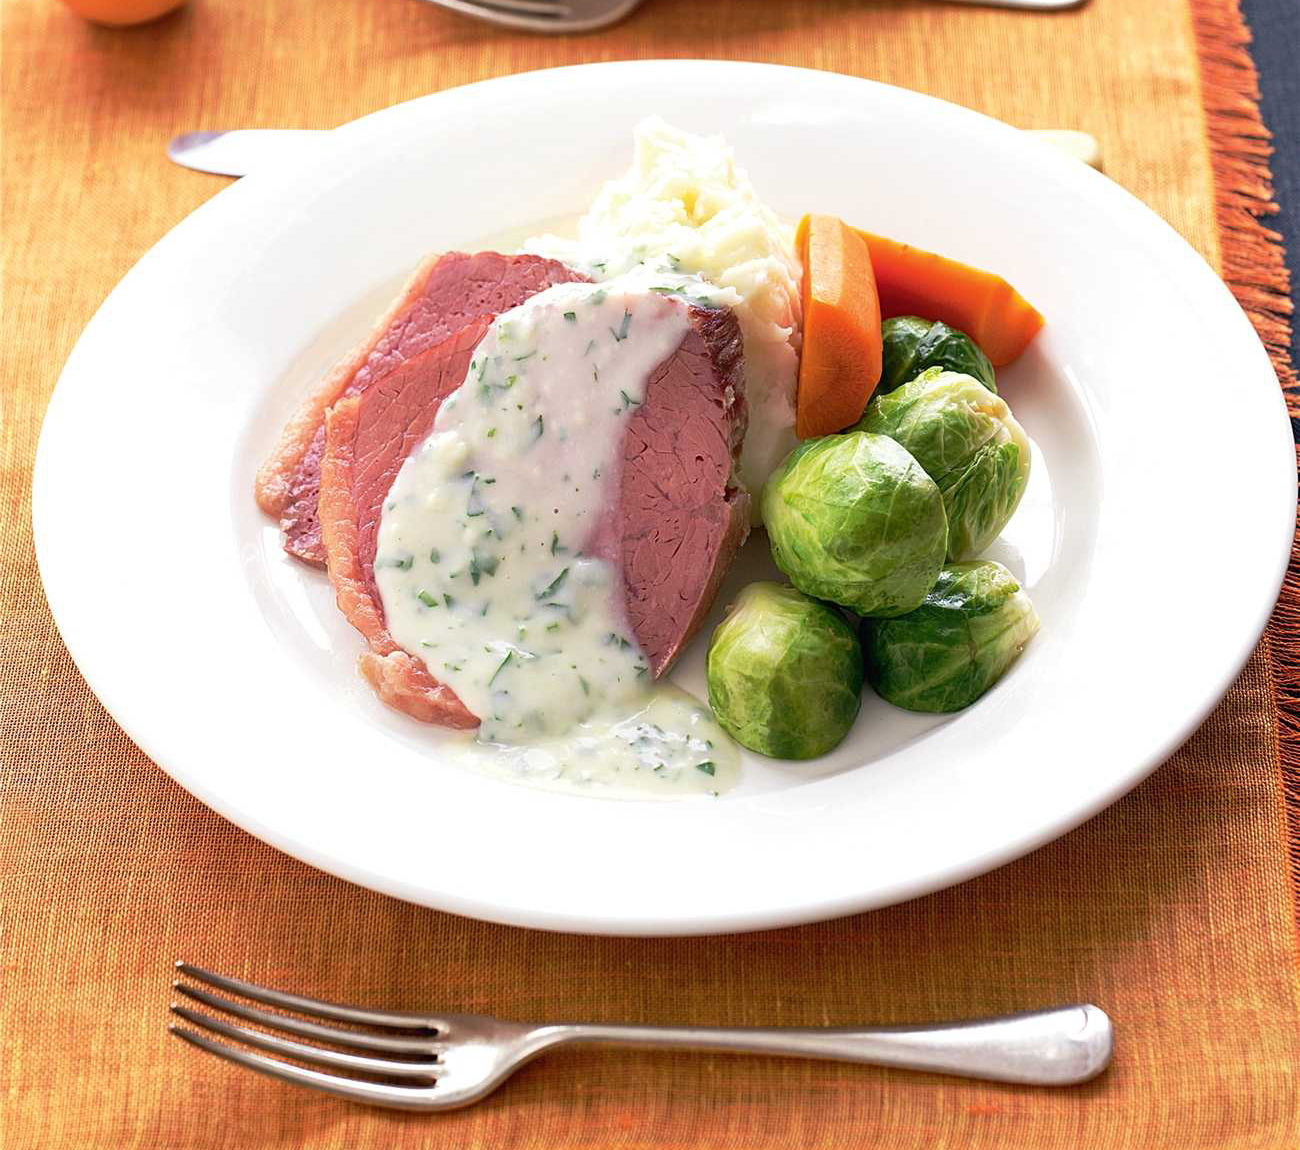 Corned beef with mustard parsley sauce